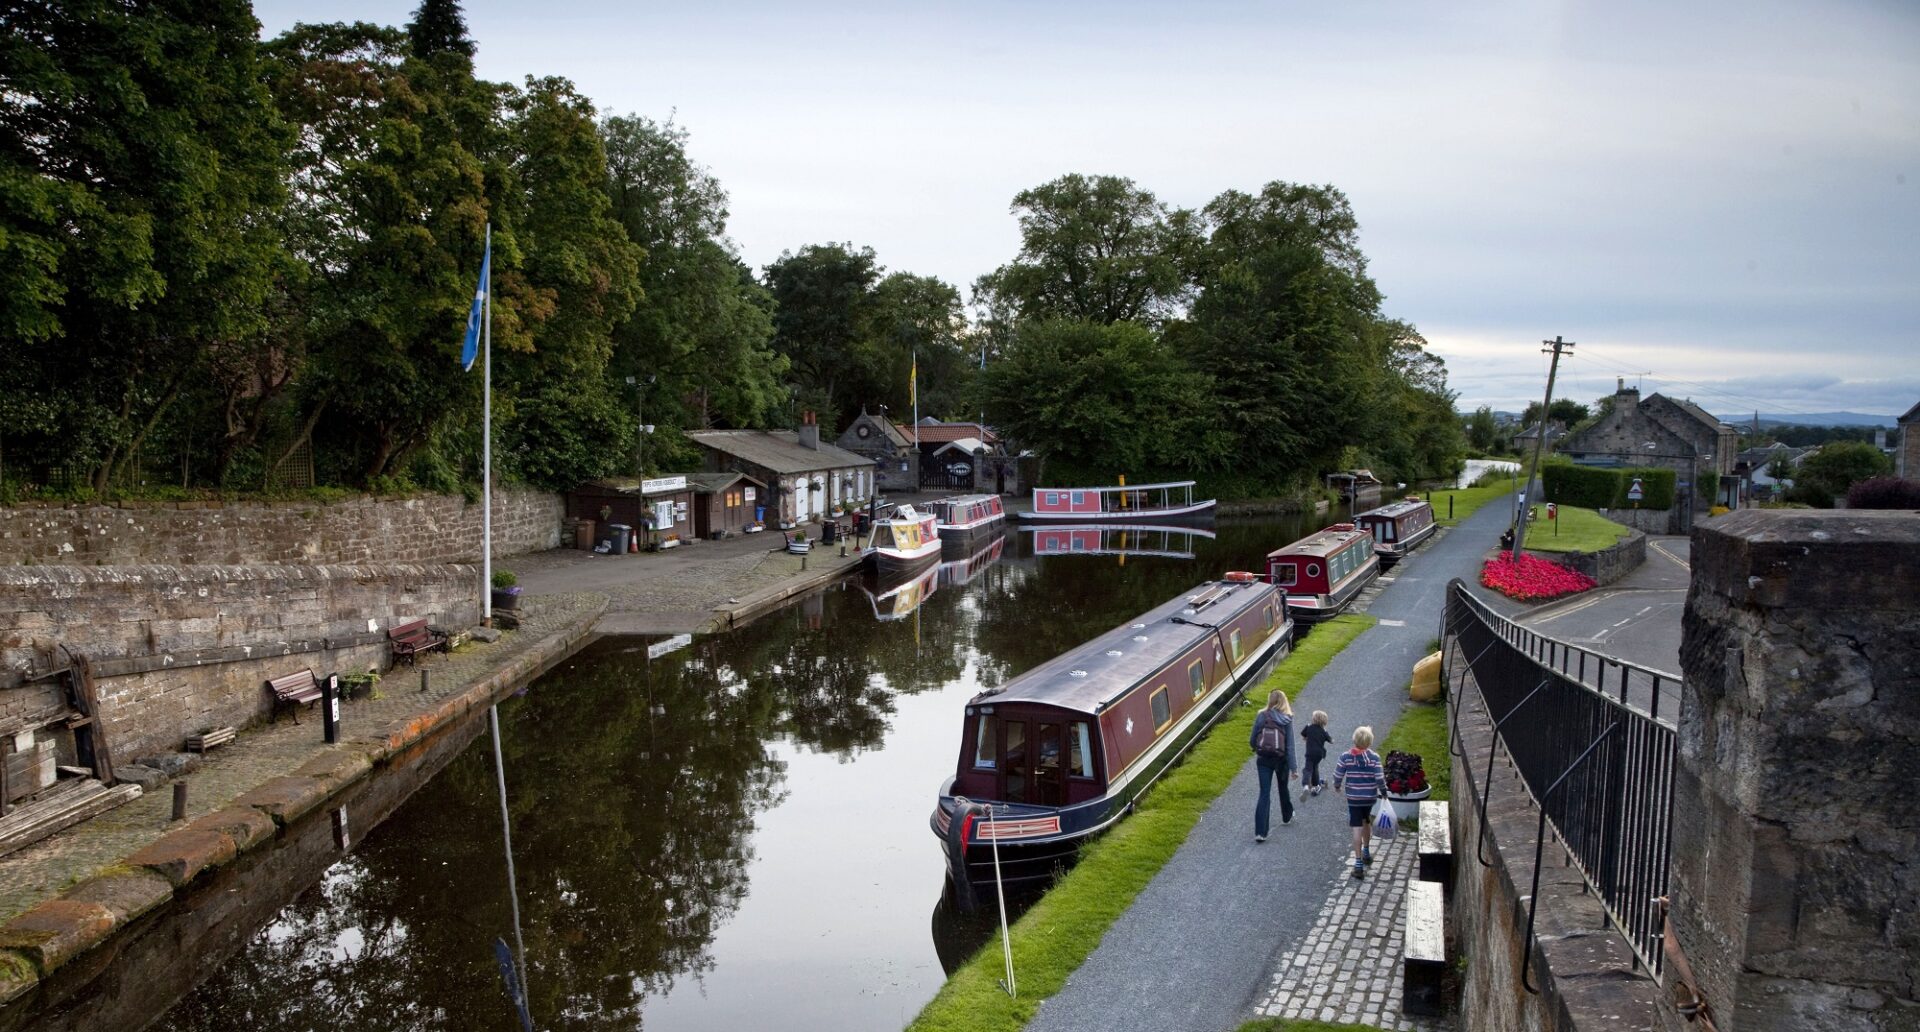 The Linlithgow Canal Centre